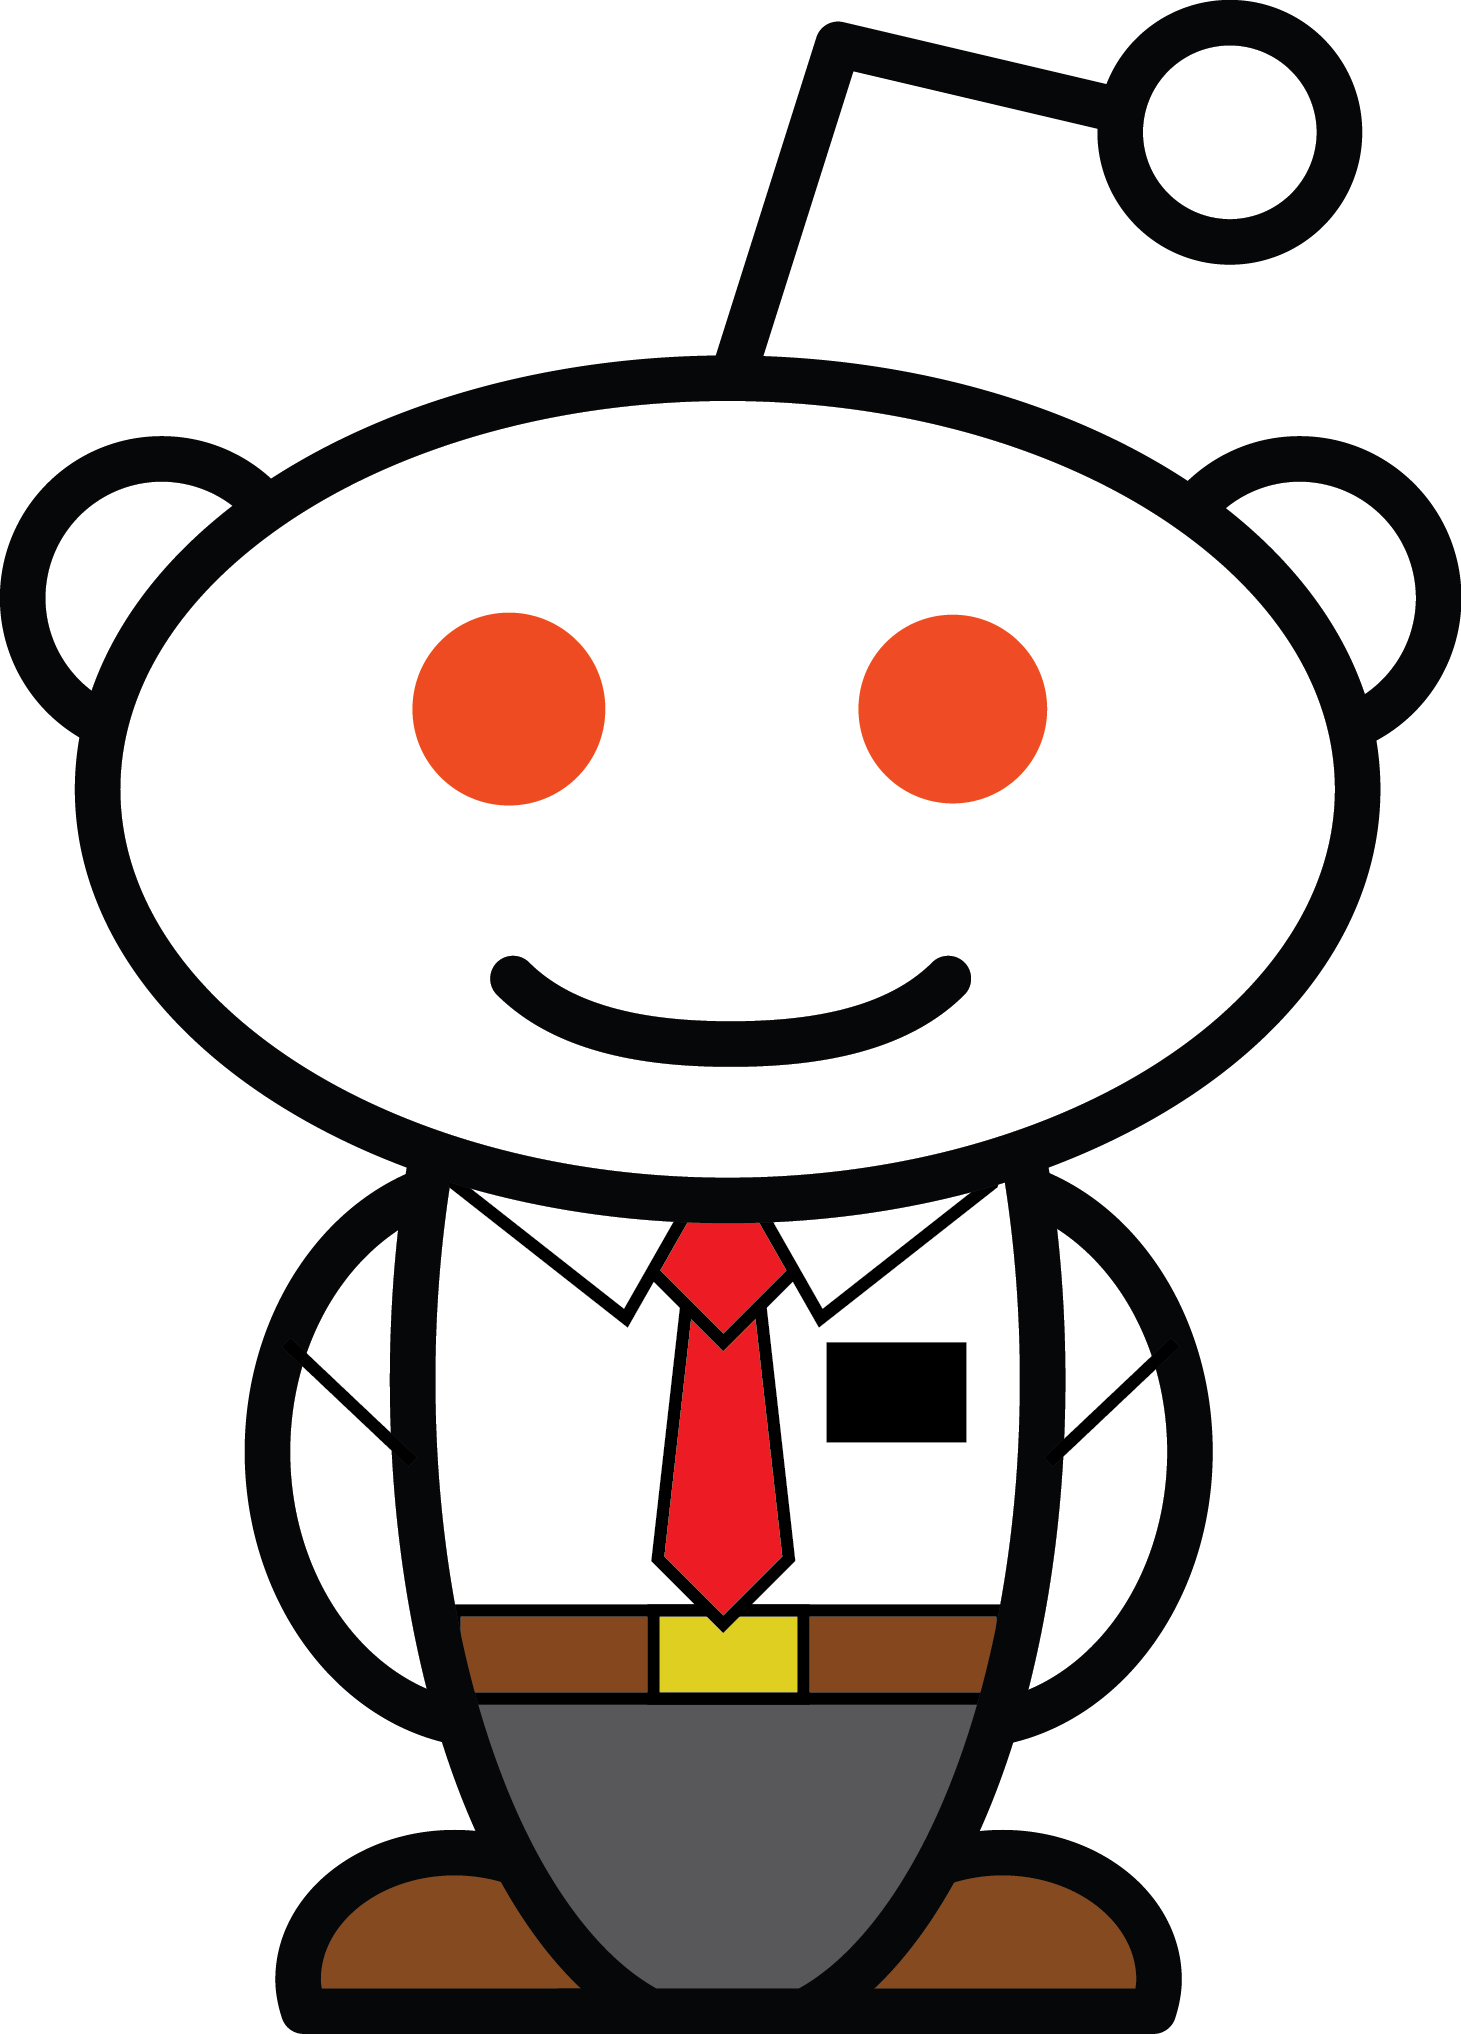 The Snoo Definitely Showed A Leaning Towards Lds Mormons - Reddit Logo Png (1461x2034)